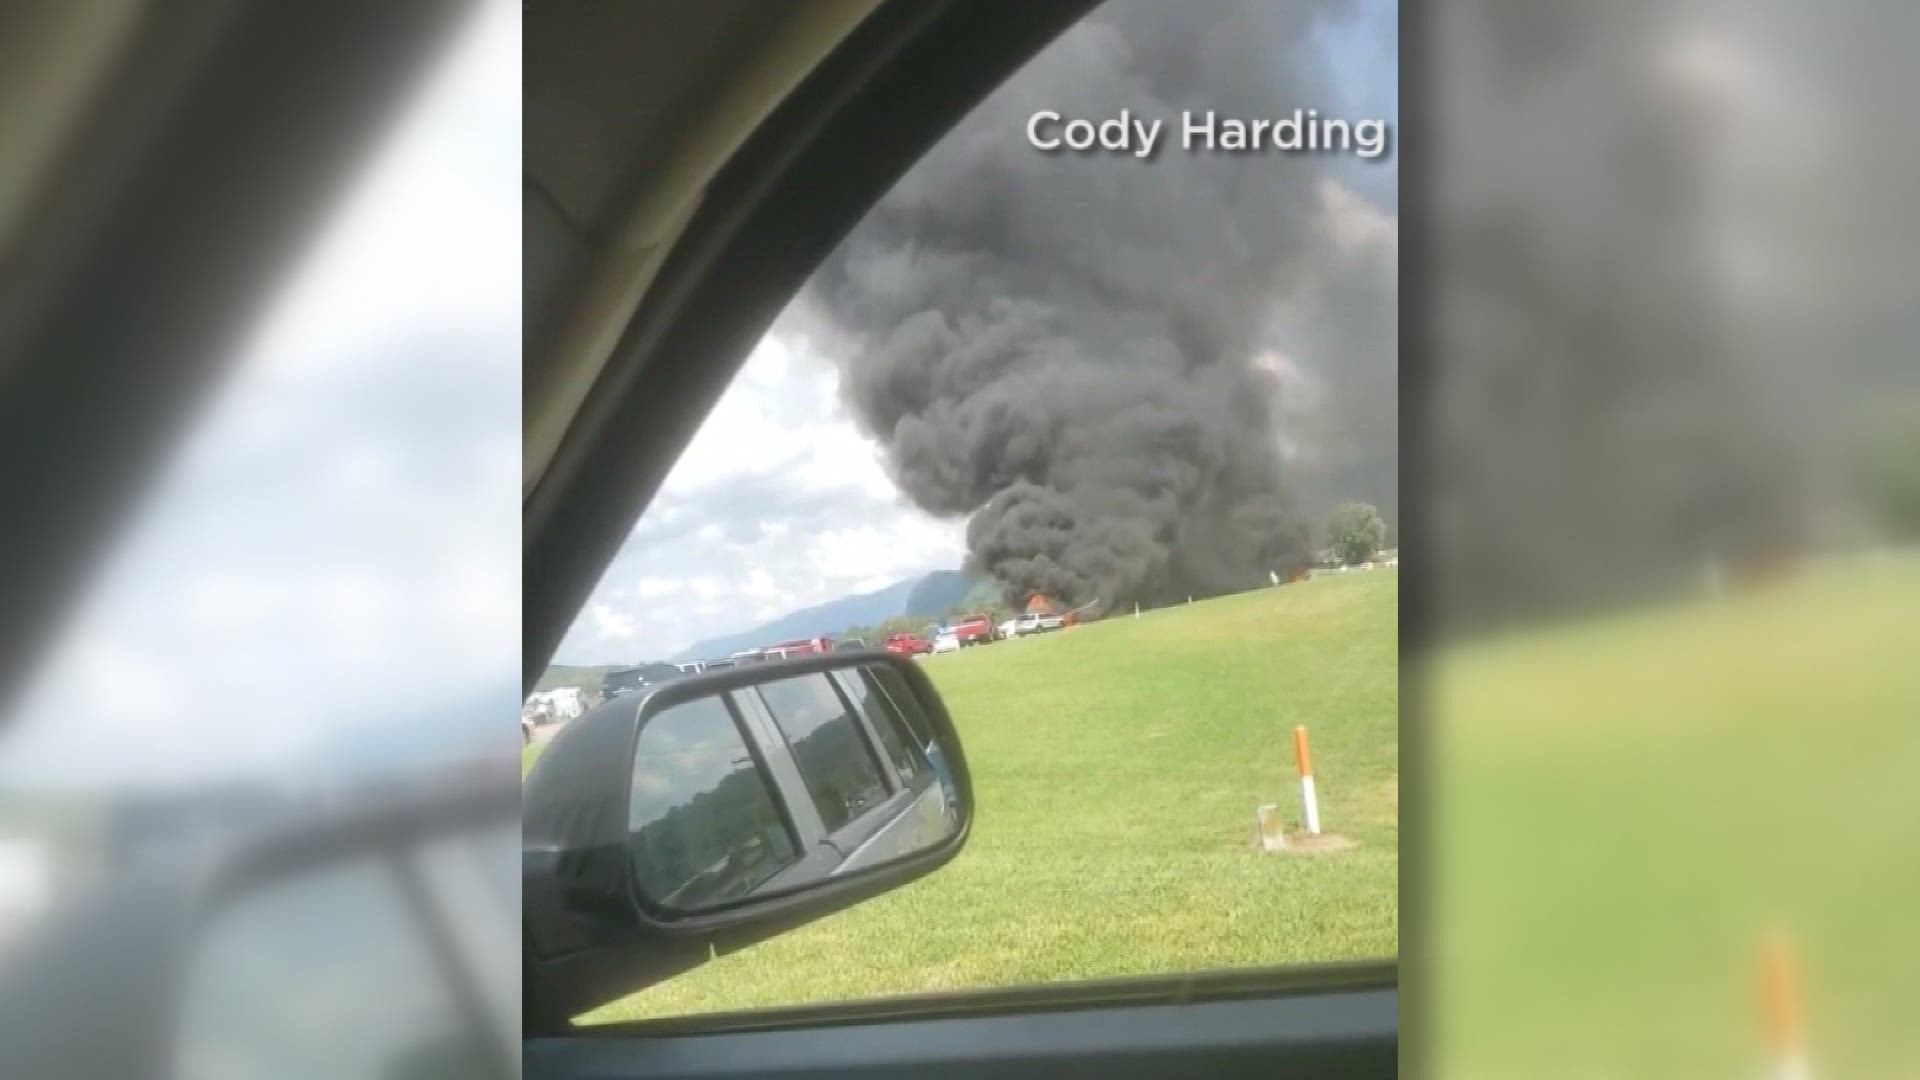 Dale Earnhardt Jr. was taken to a hospital after his plane crashed in east Tennessee. The NASCAR television analyst and former driver's sister, Kelley Earnhardt Miller, tweeted that "everyone is safe and has been taken to the hospital for further evaluation."